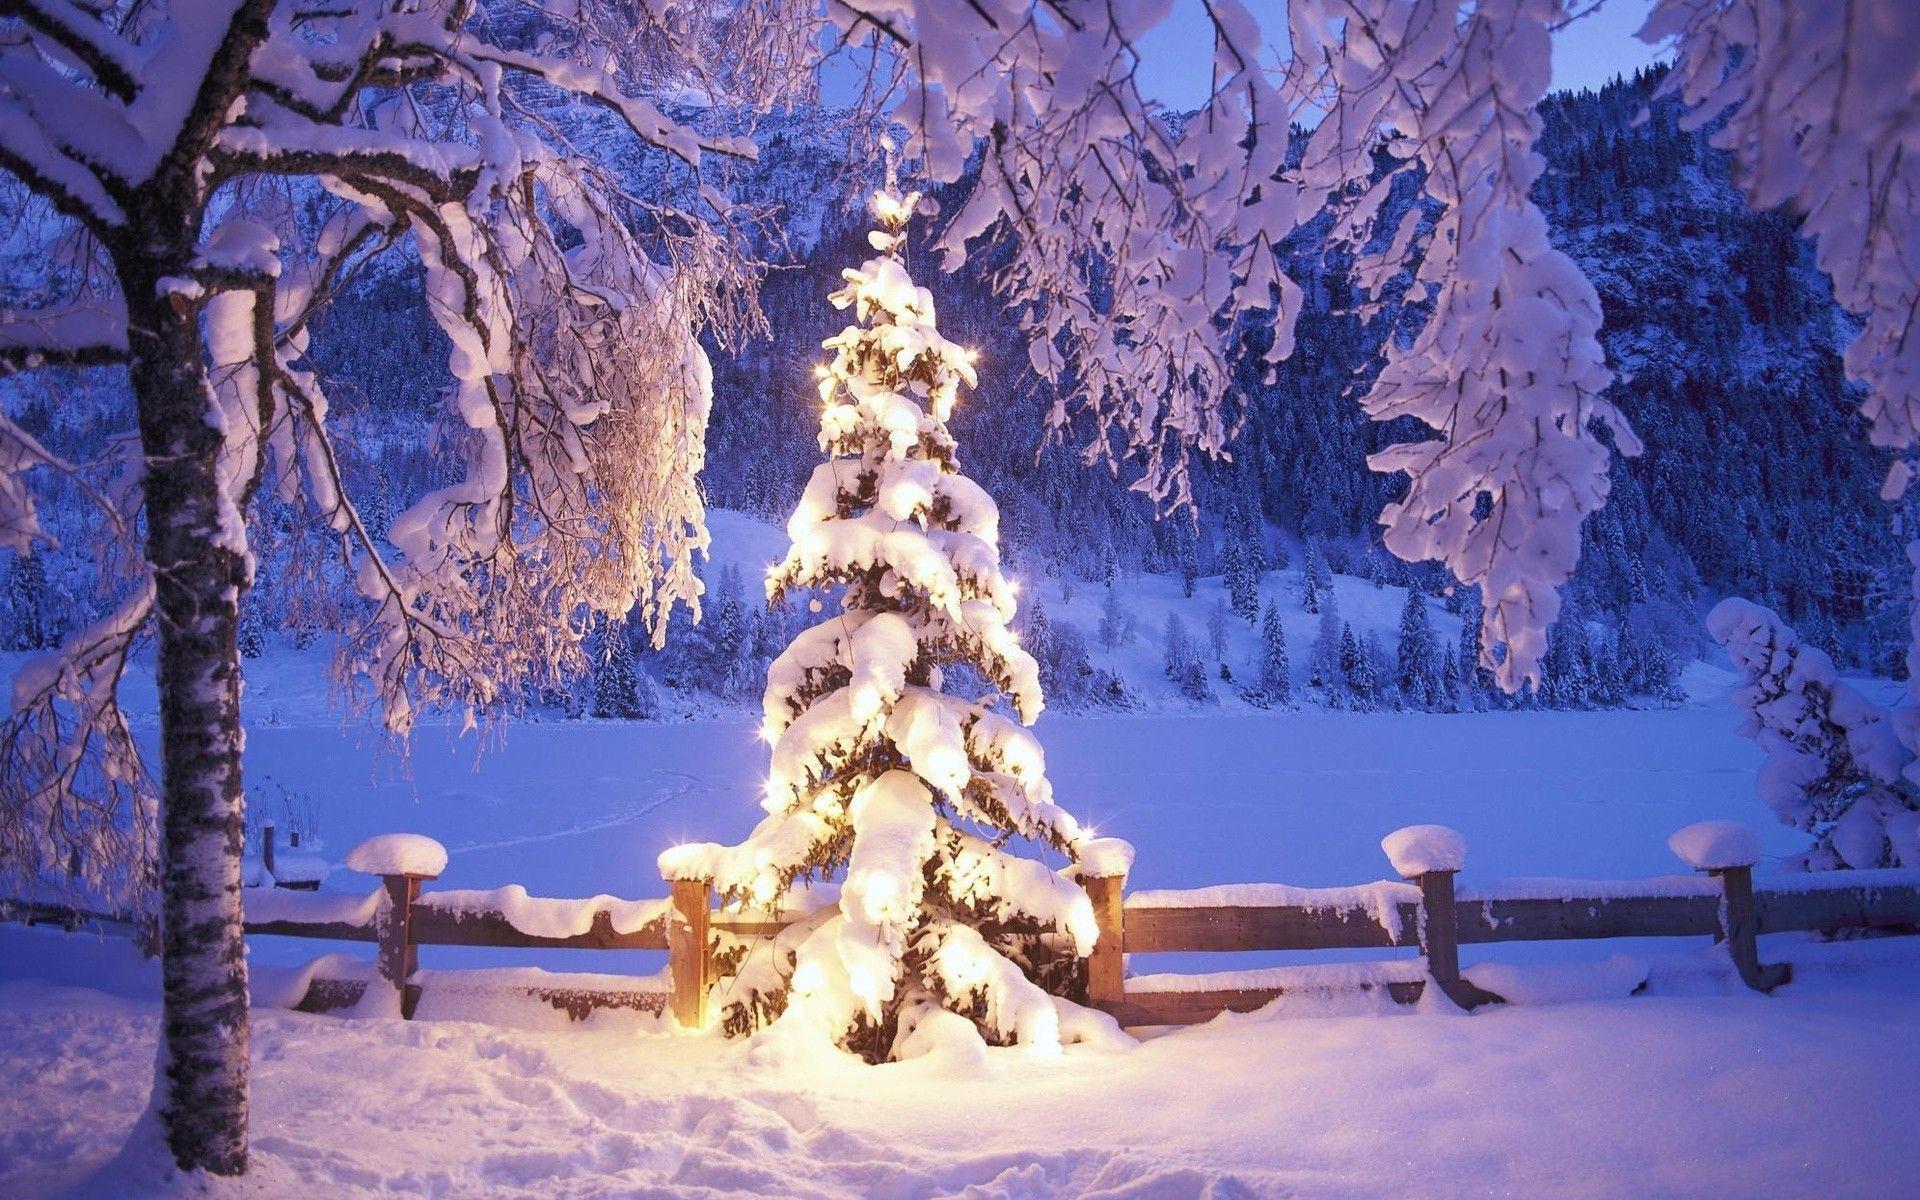 Snowy Christmas Wallpapers - Wallpaper Cave